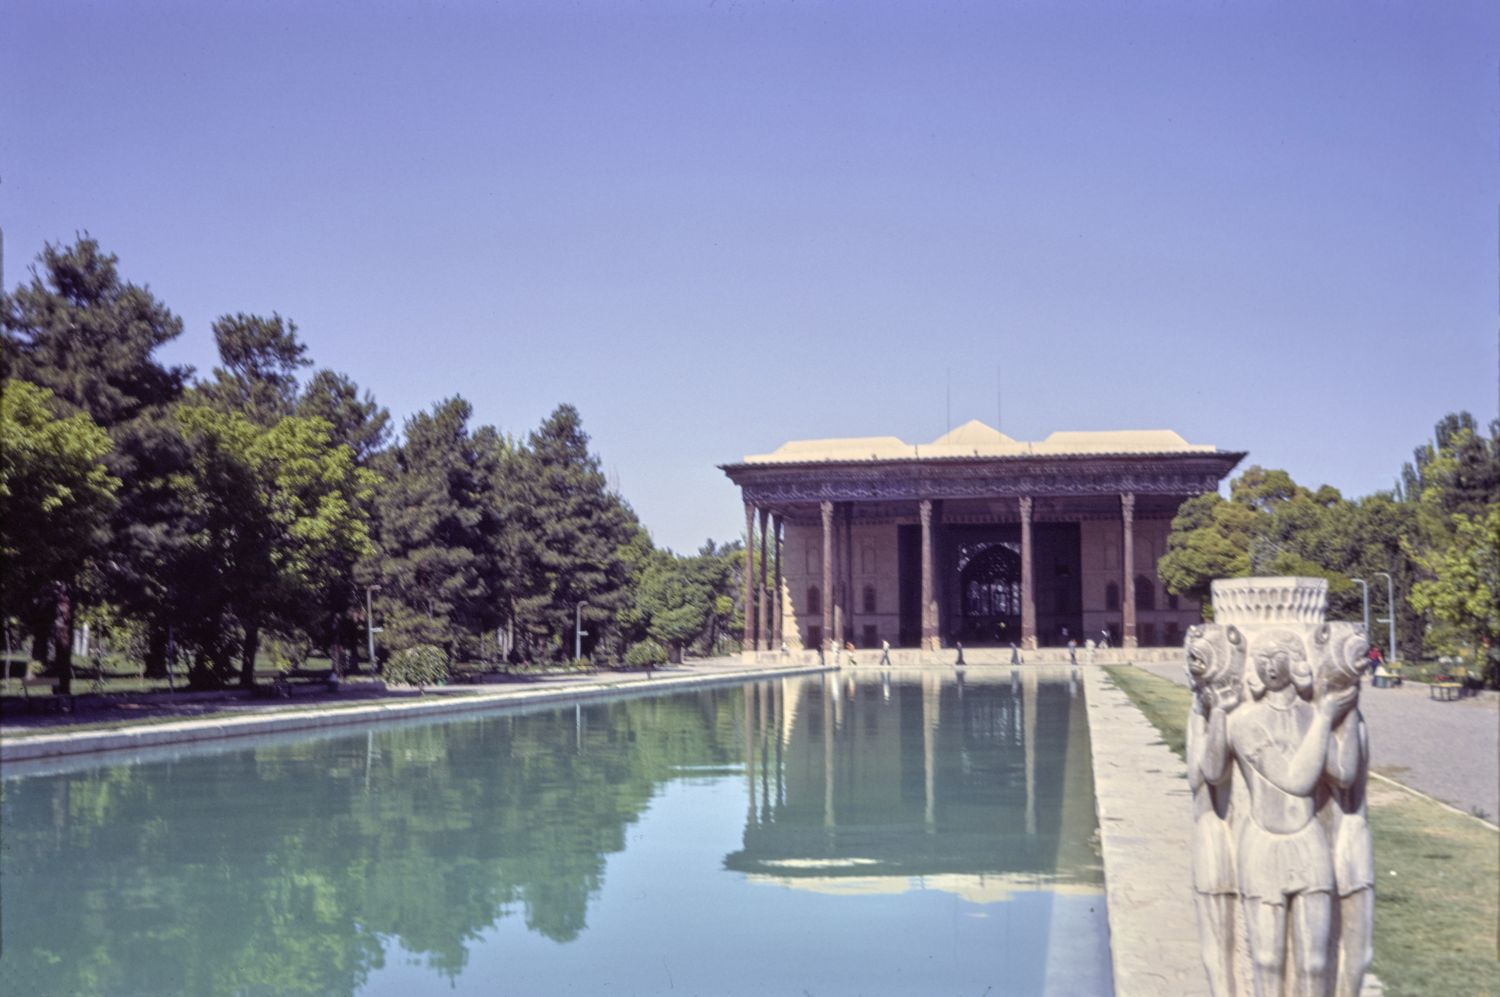 General view from east across reflecting pool toward talar porch.